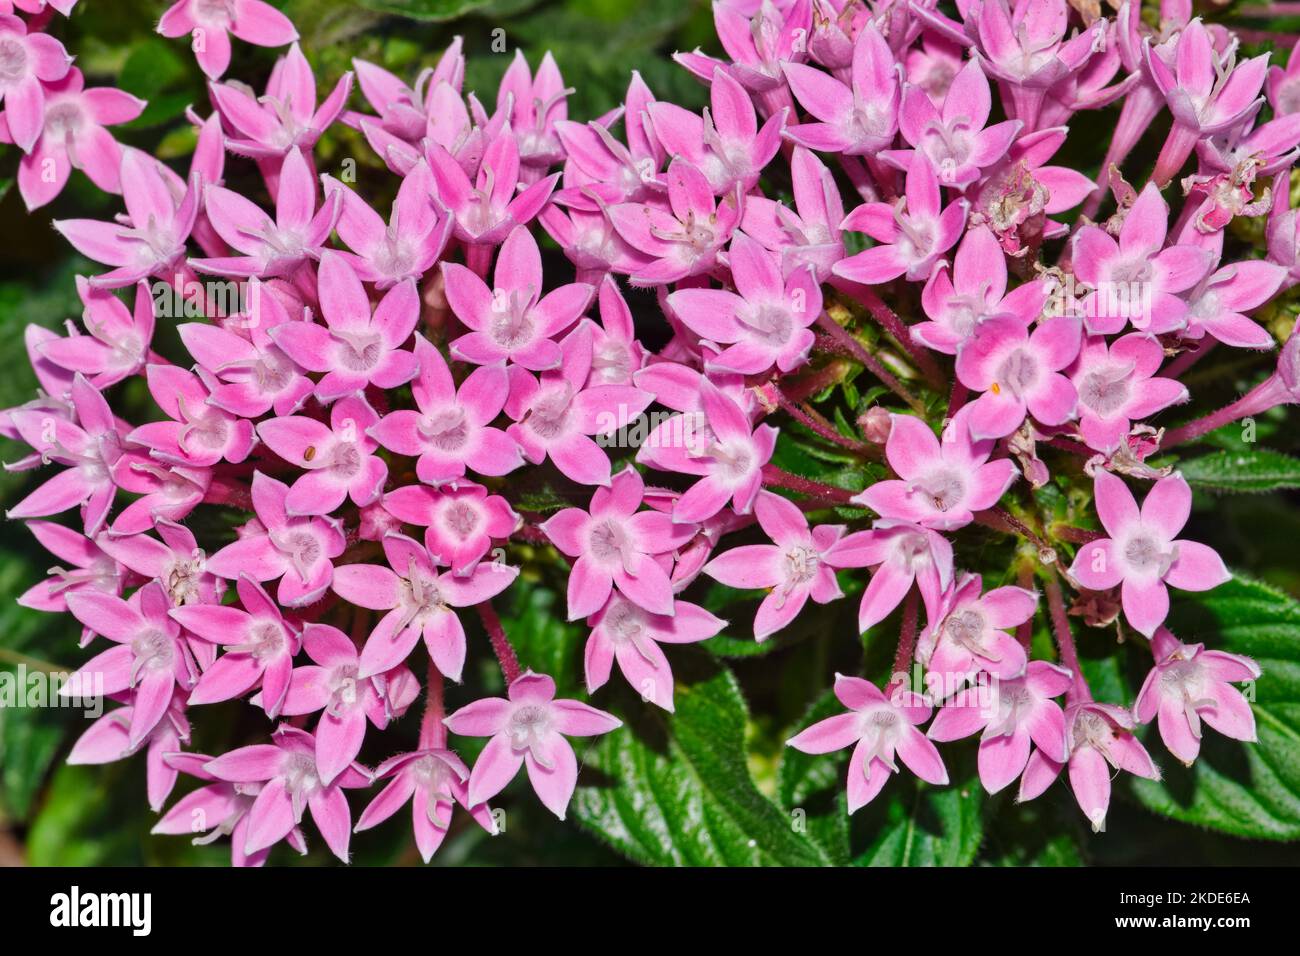 Pink Egyptian starcluster (Pentas lanceolata) flowers blooming in a garden bed. African flowering plant in the Madder family Rubiaceae. Stock Photo